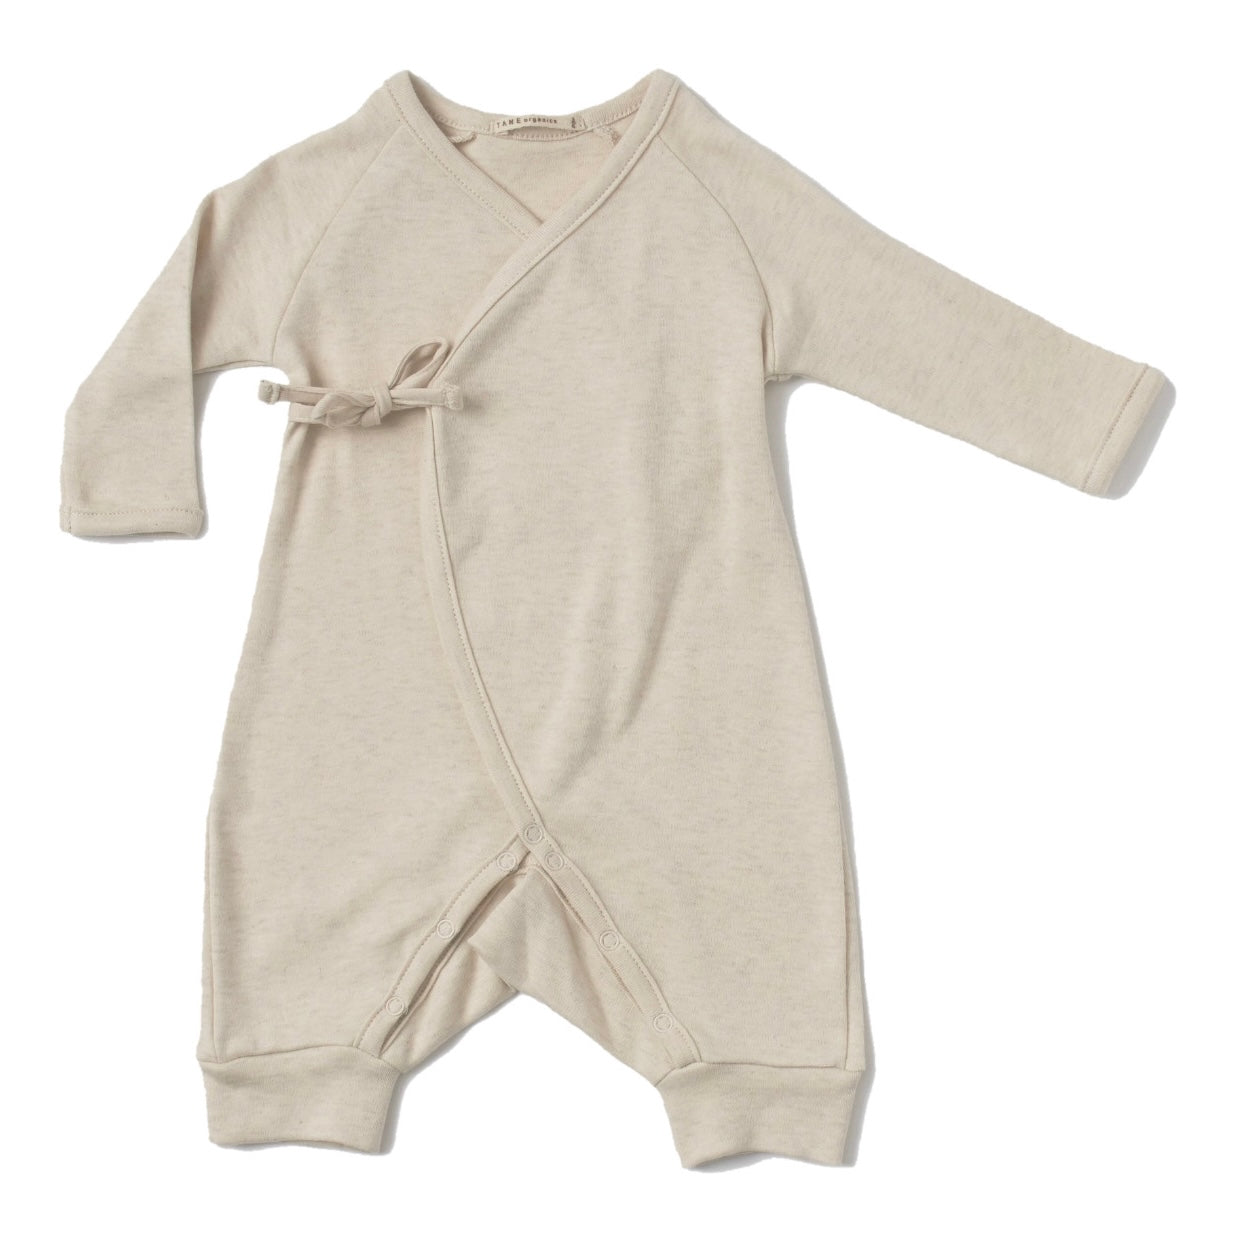 Kimono Onesie with Leggings in Brushed Heathered Knit